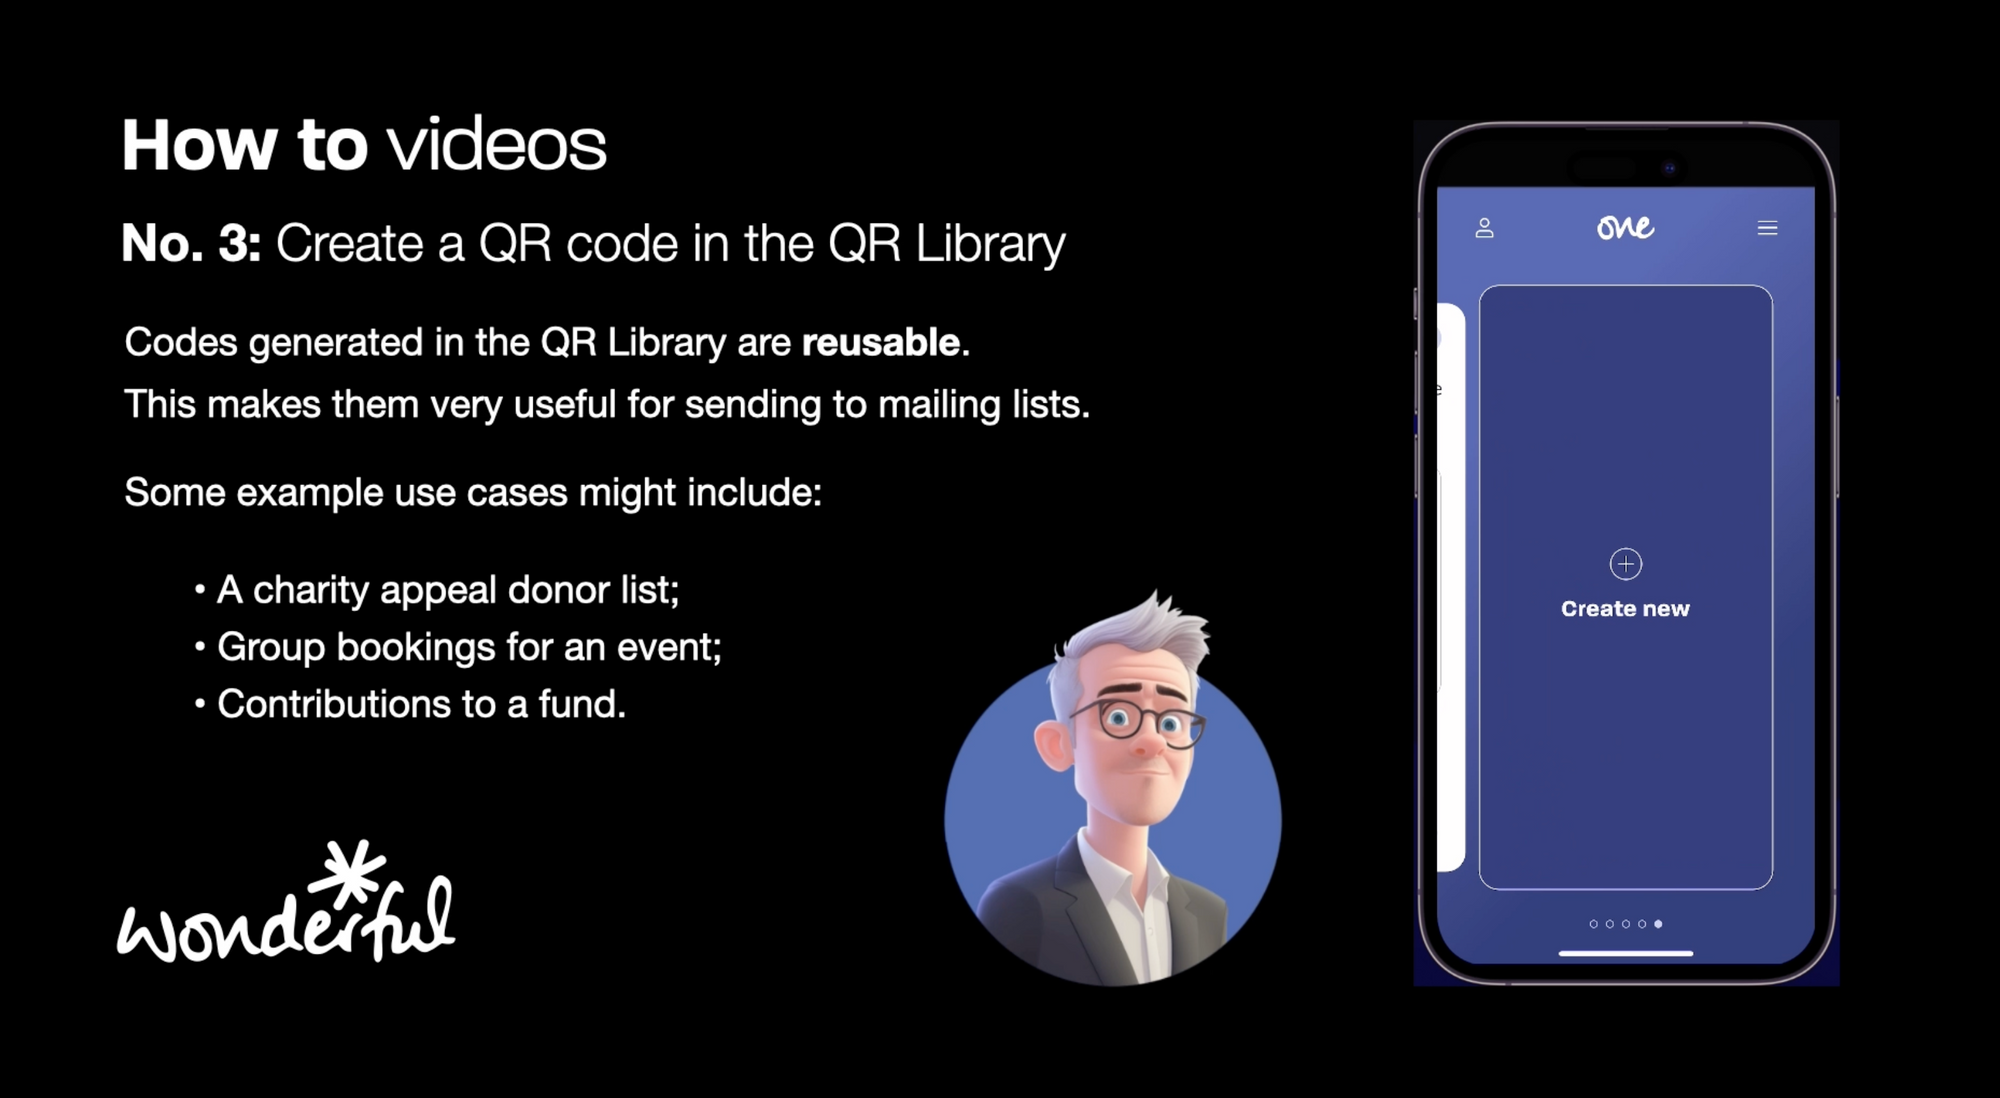 Add a QR code to the Library